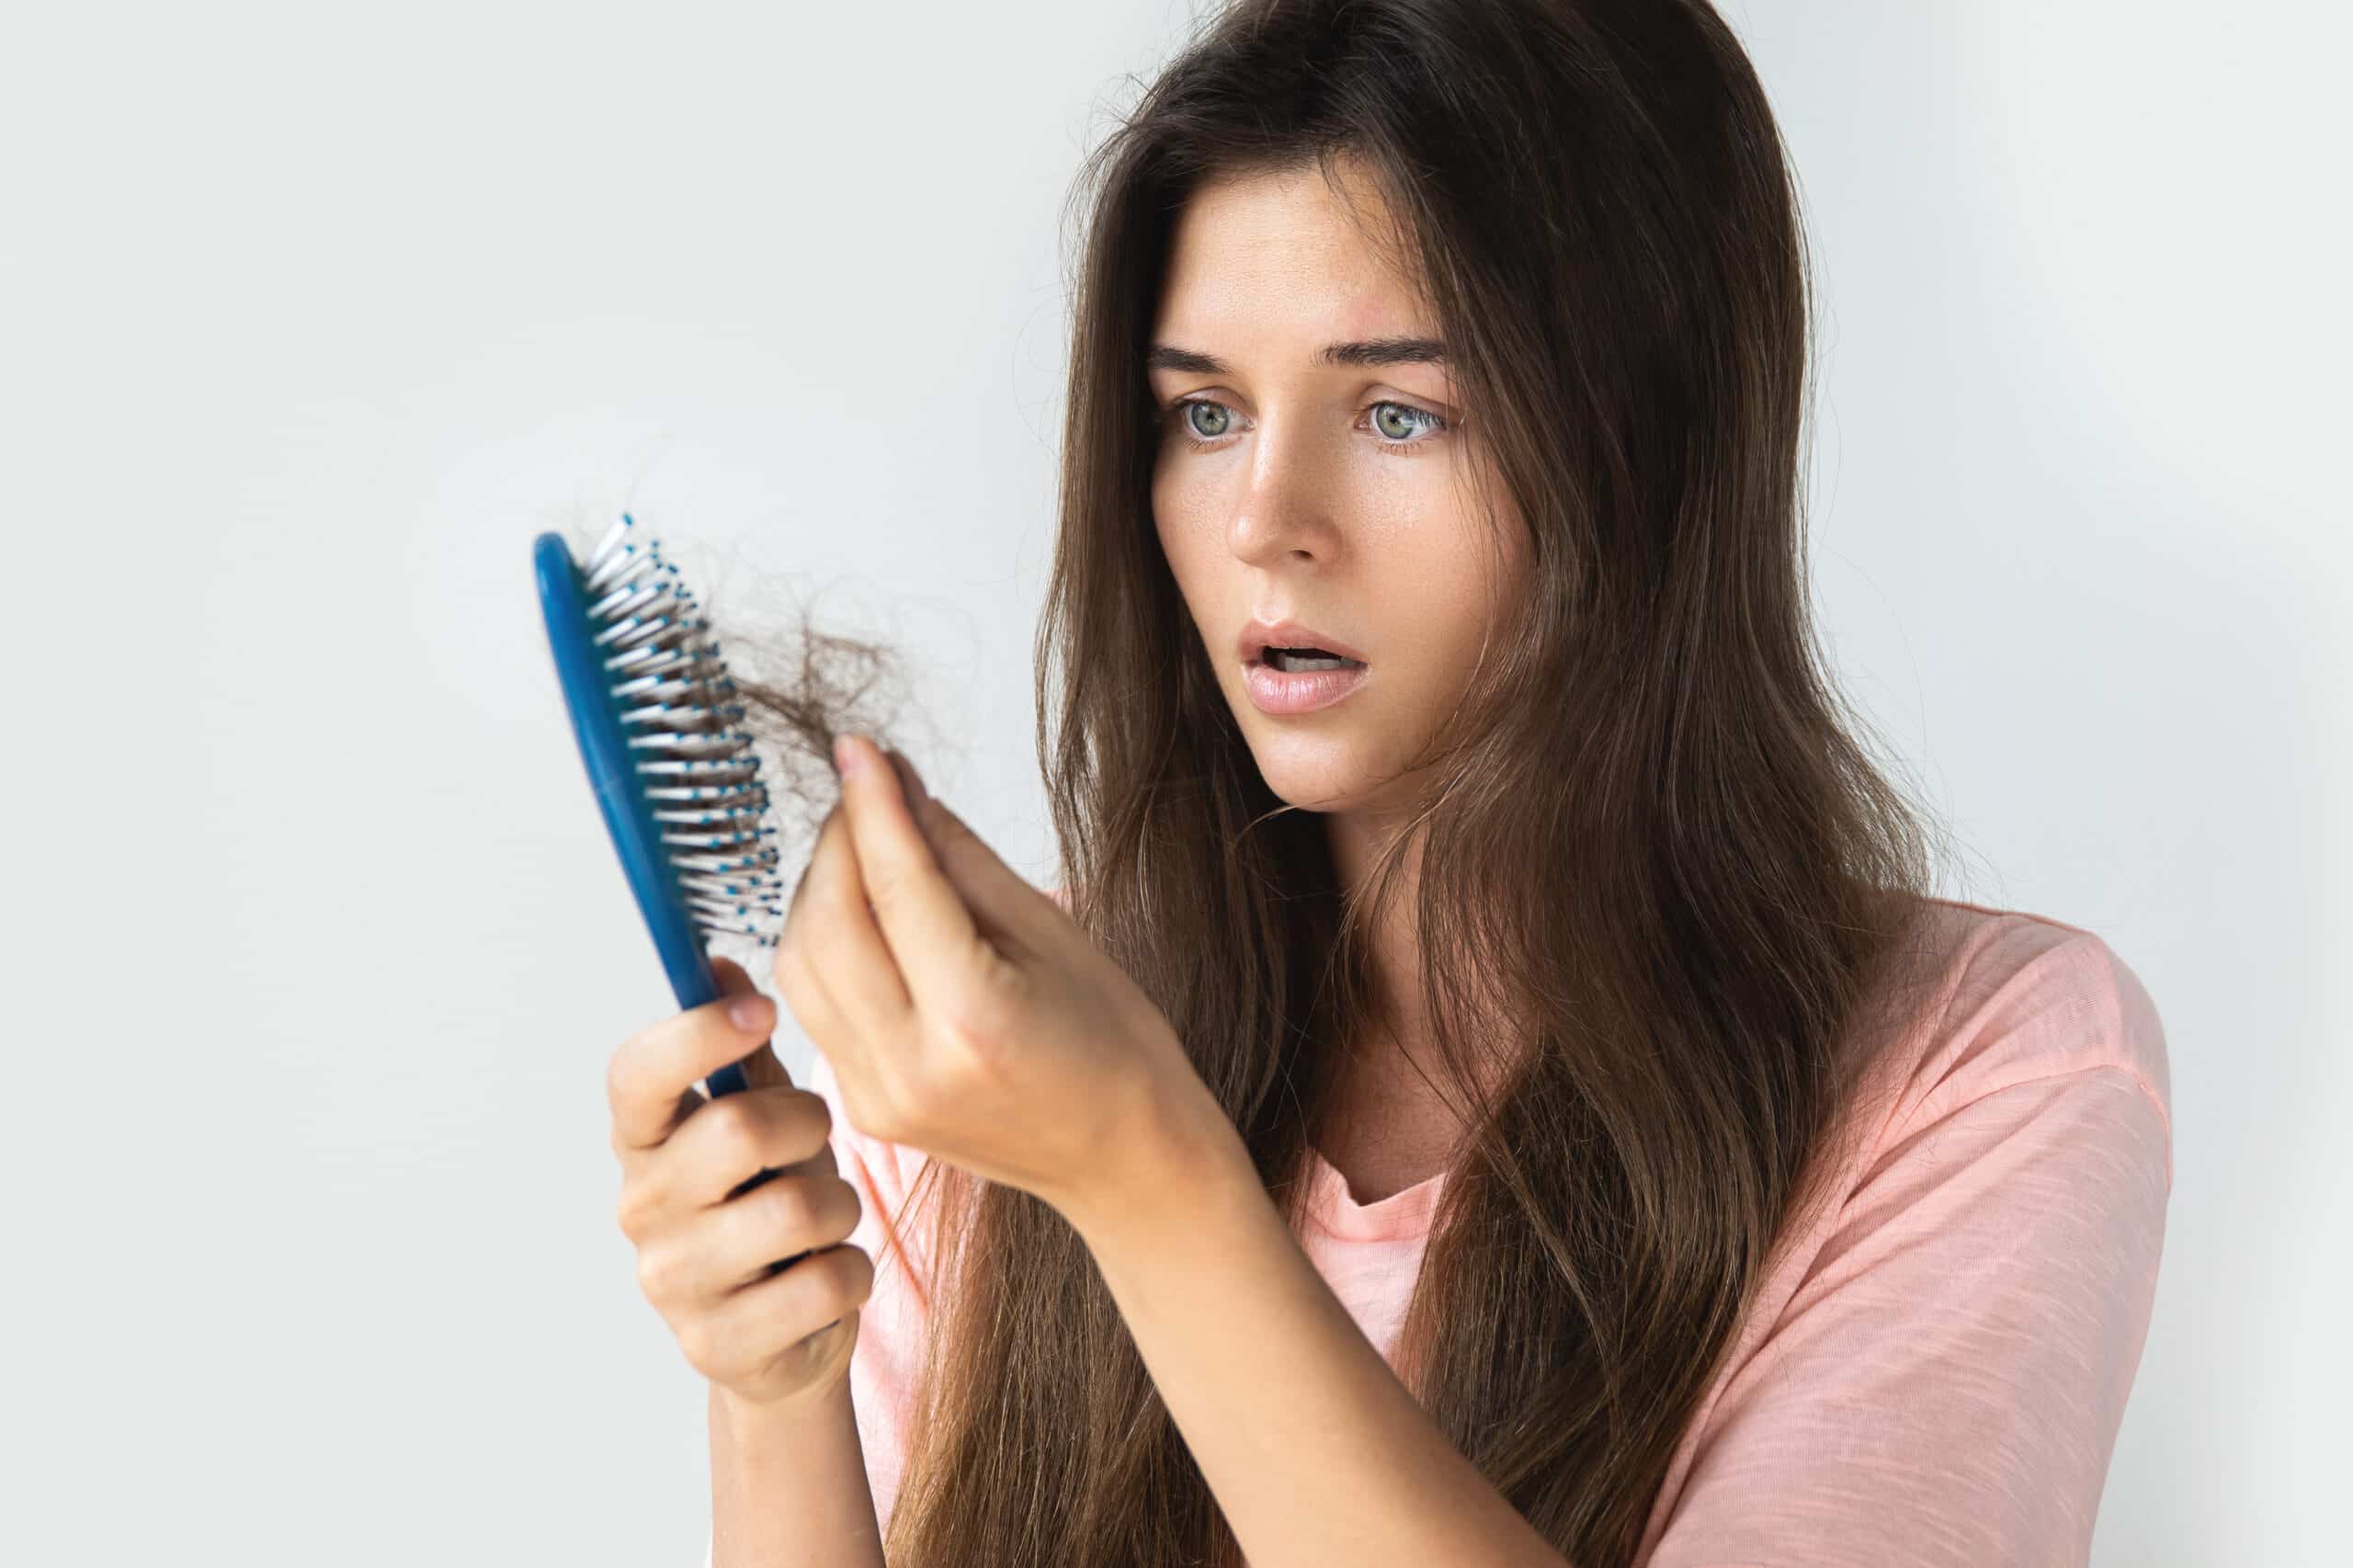 Woman in shock from hair loss, looking at strands of hair on brush.